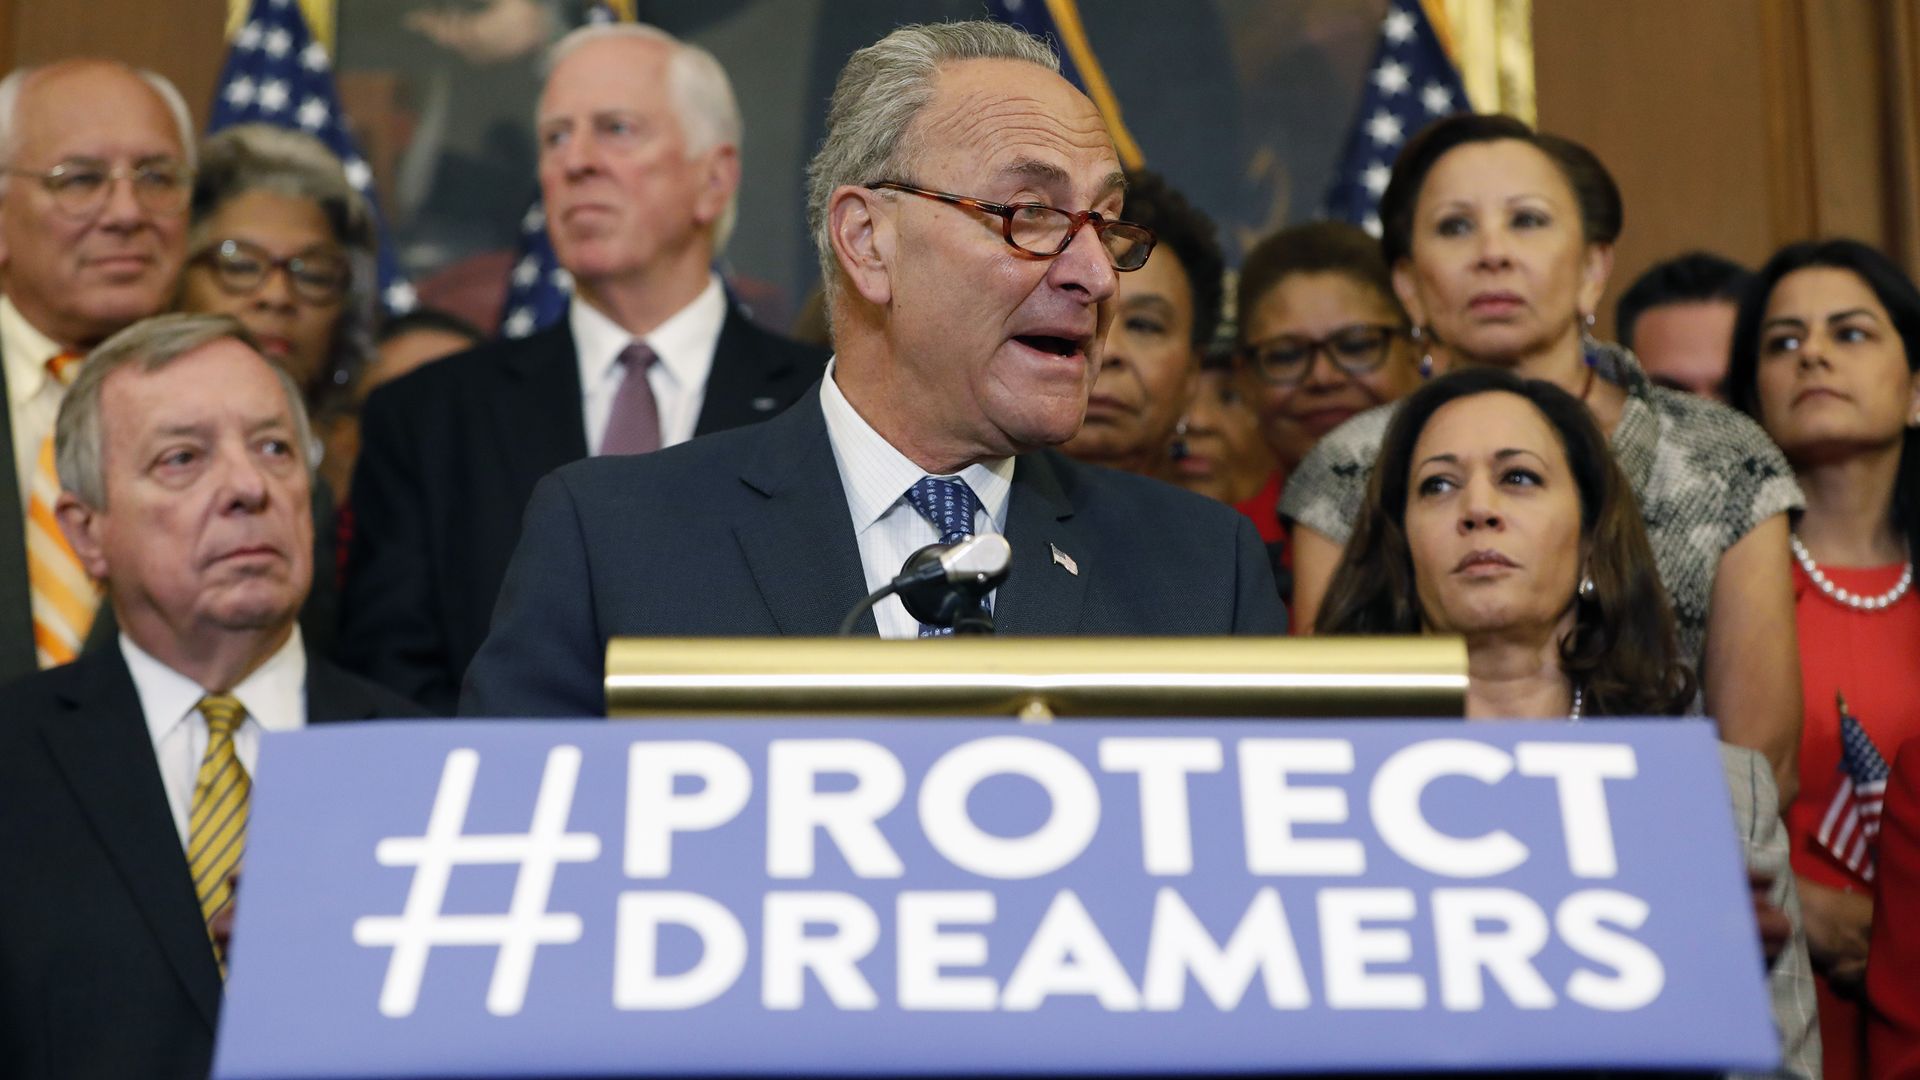 Chuck Schumer speaking at a podium with a blue "#ProtectDreamers" sign on the front